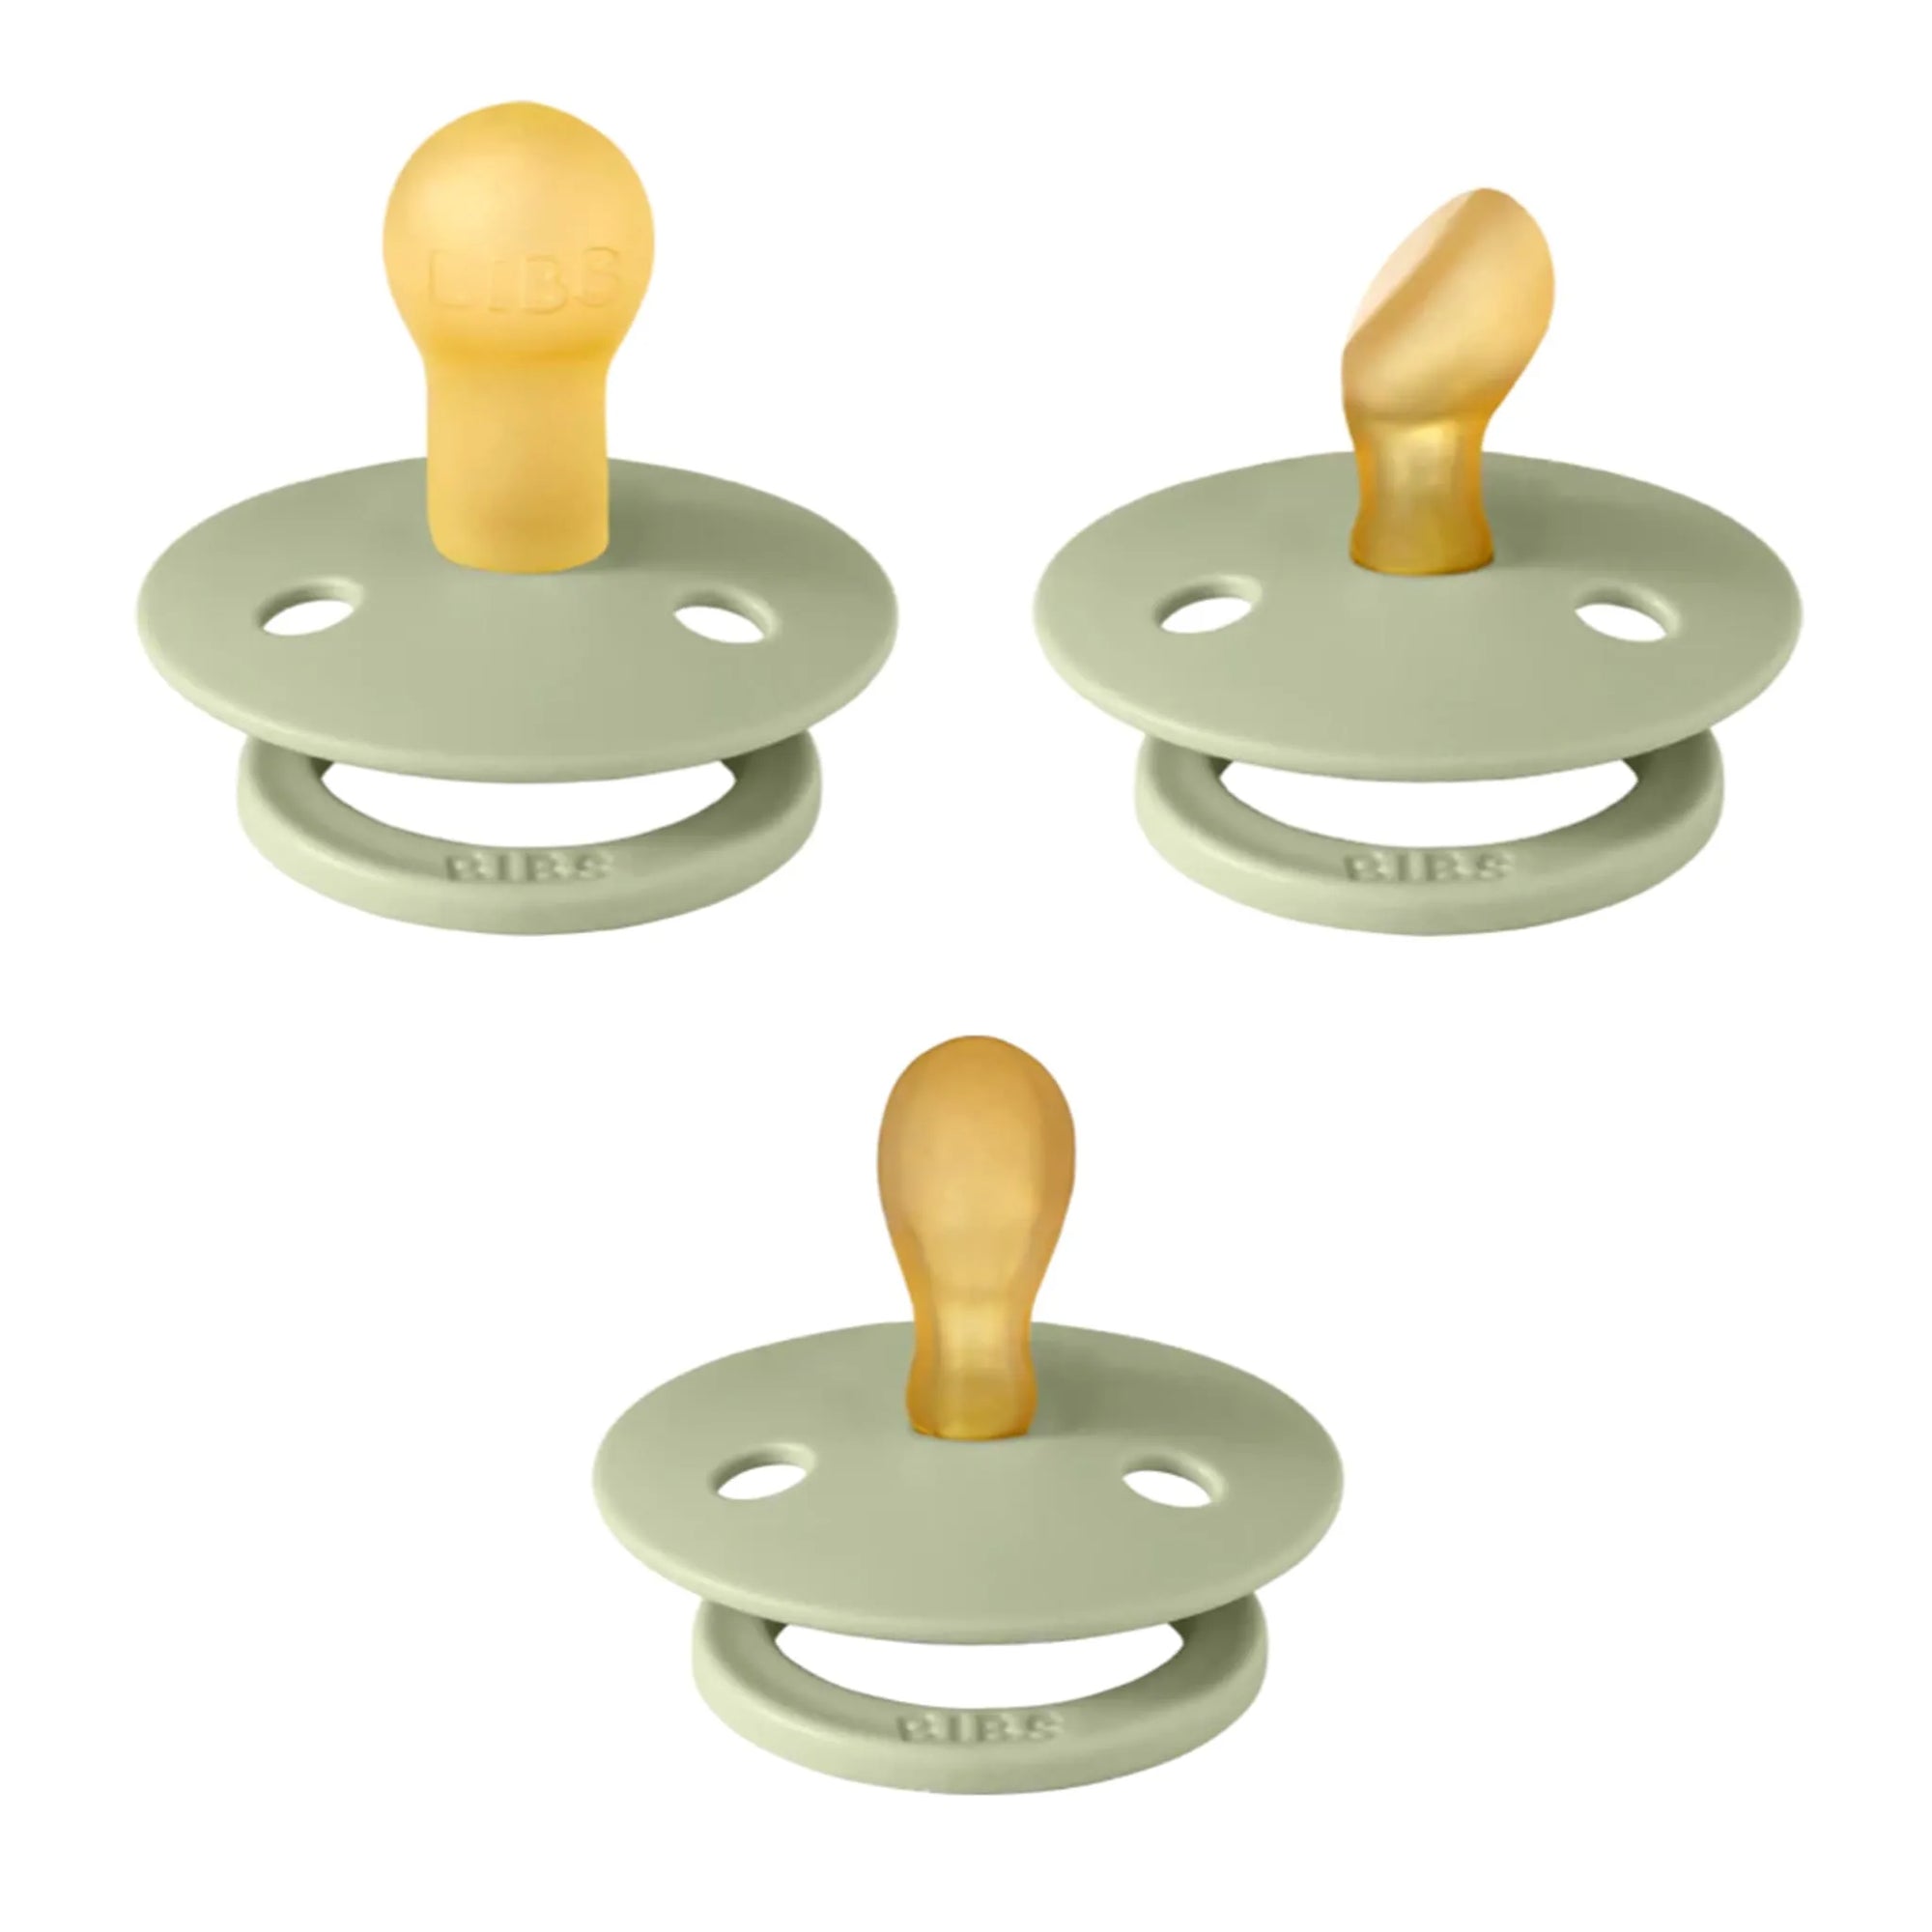 BIBS Pacifiers Try-It Collection 3 Pack - Sage